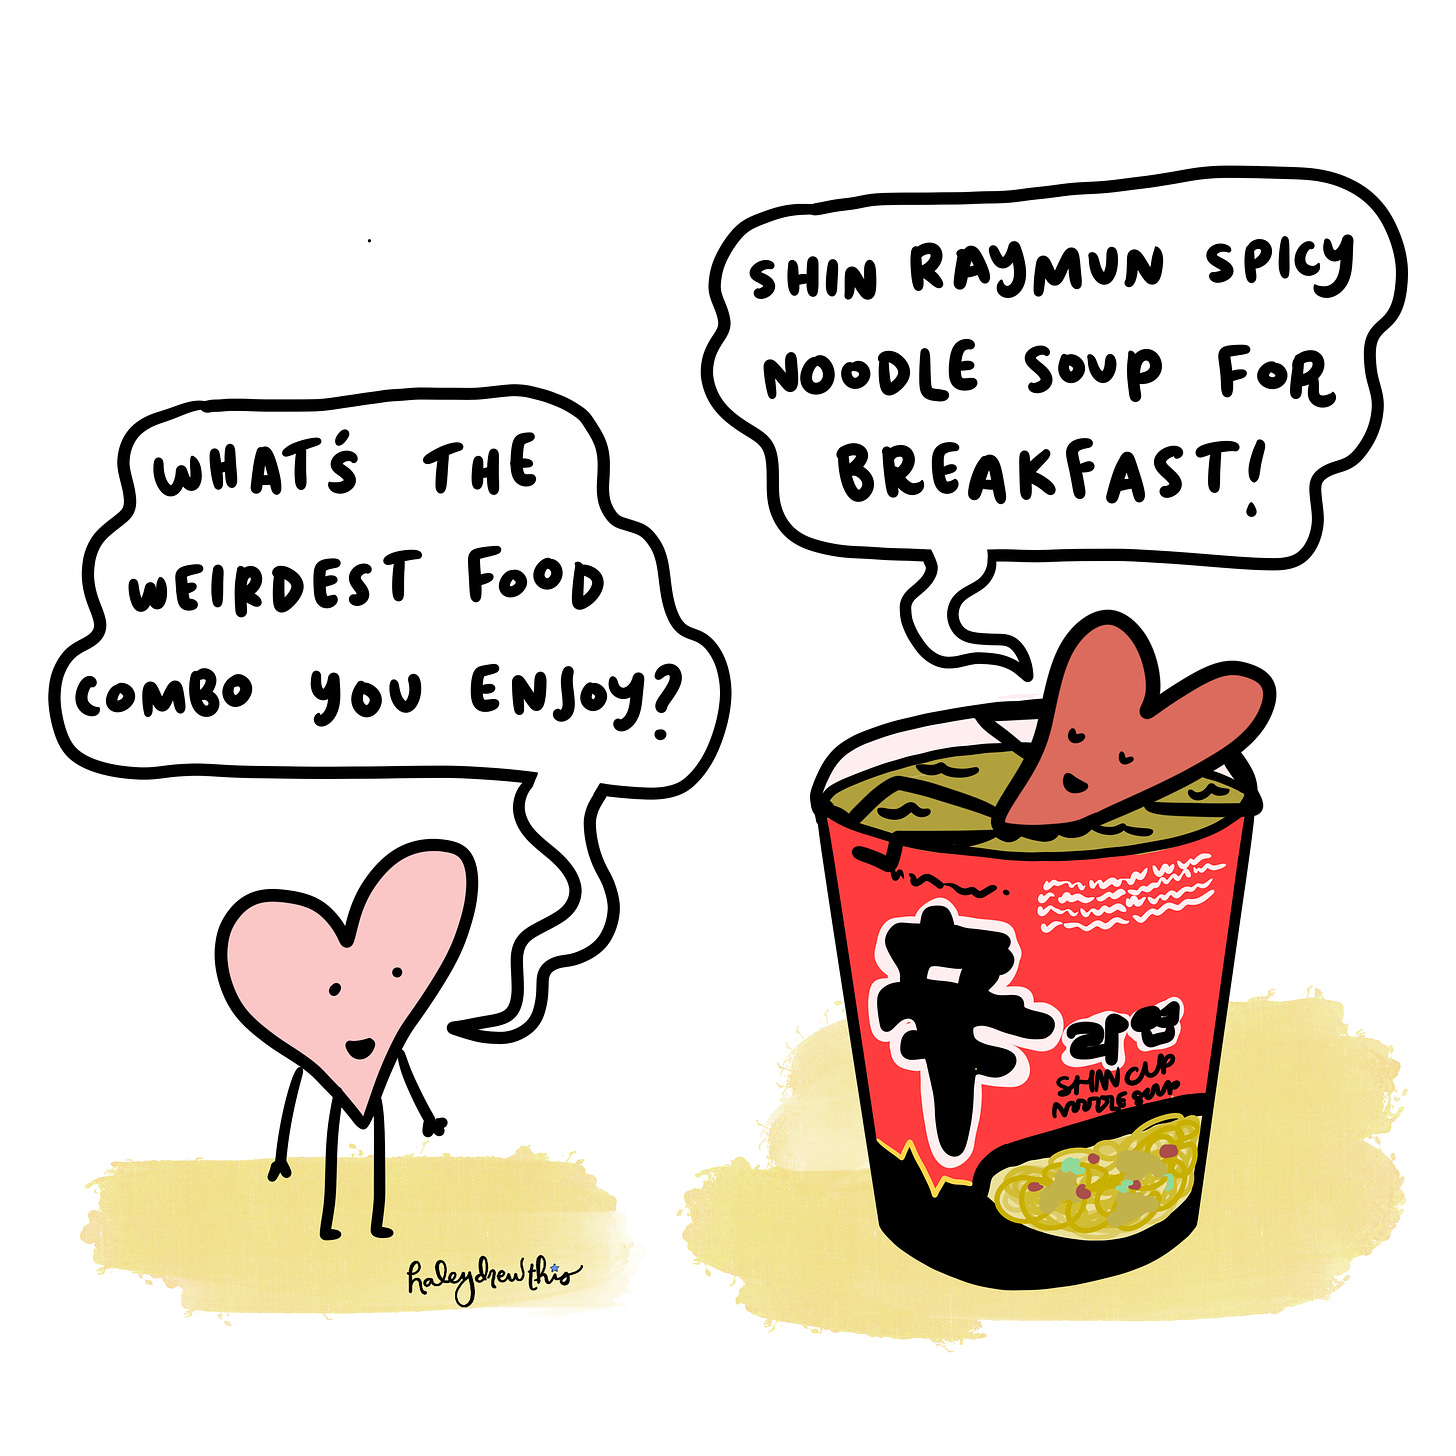 Text reads: What is the weirdest food combo you enjoy? Shin Raymun spicy noodle soup for breakfast!